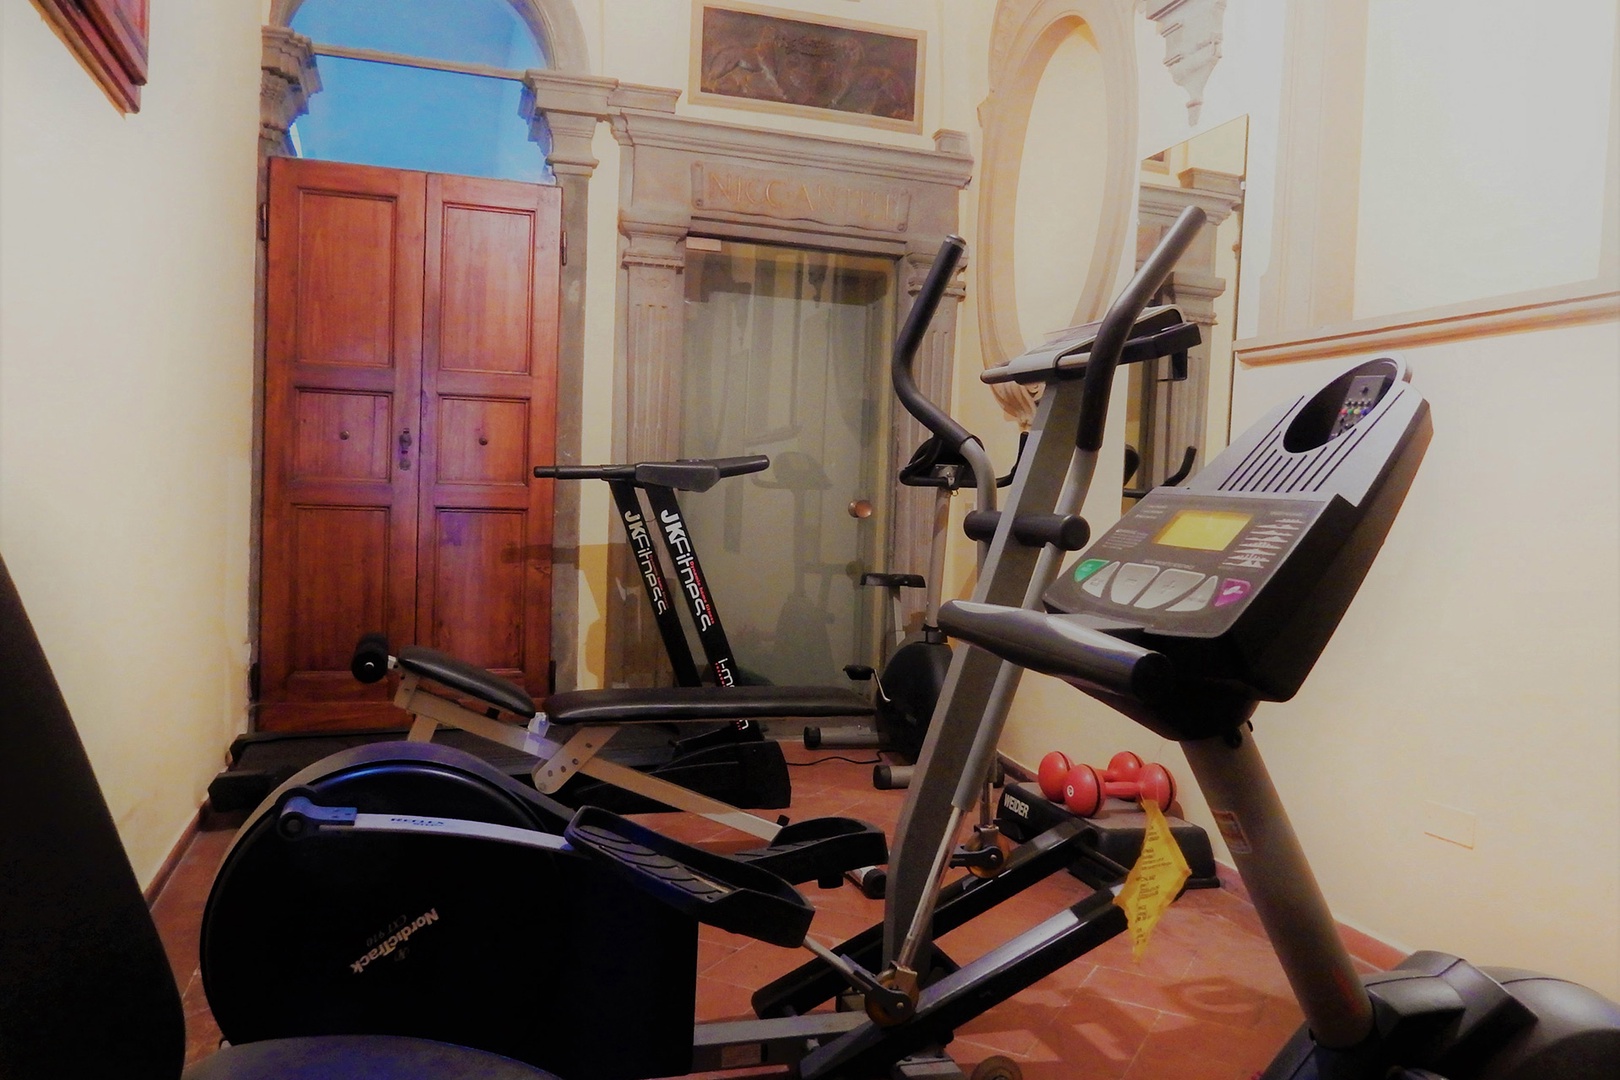 A little gym for the guests in Palazzo Santa Croce.